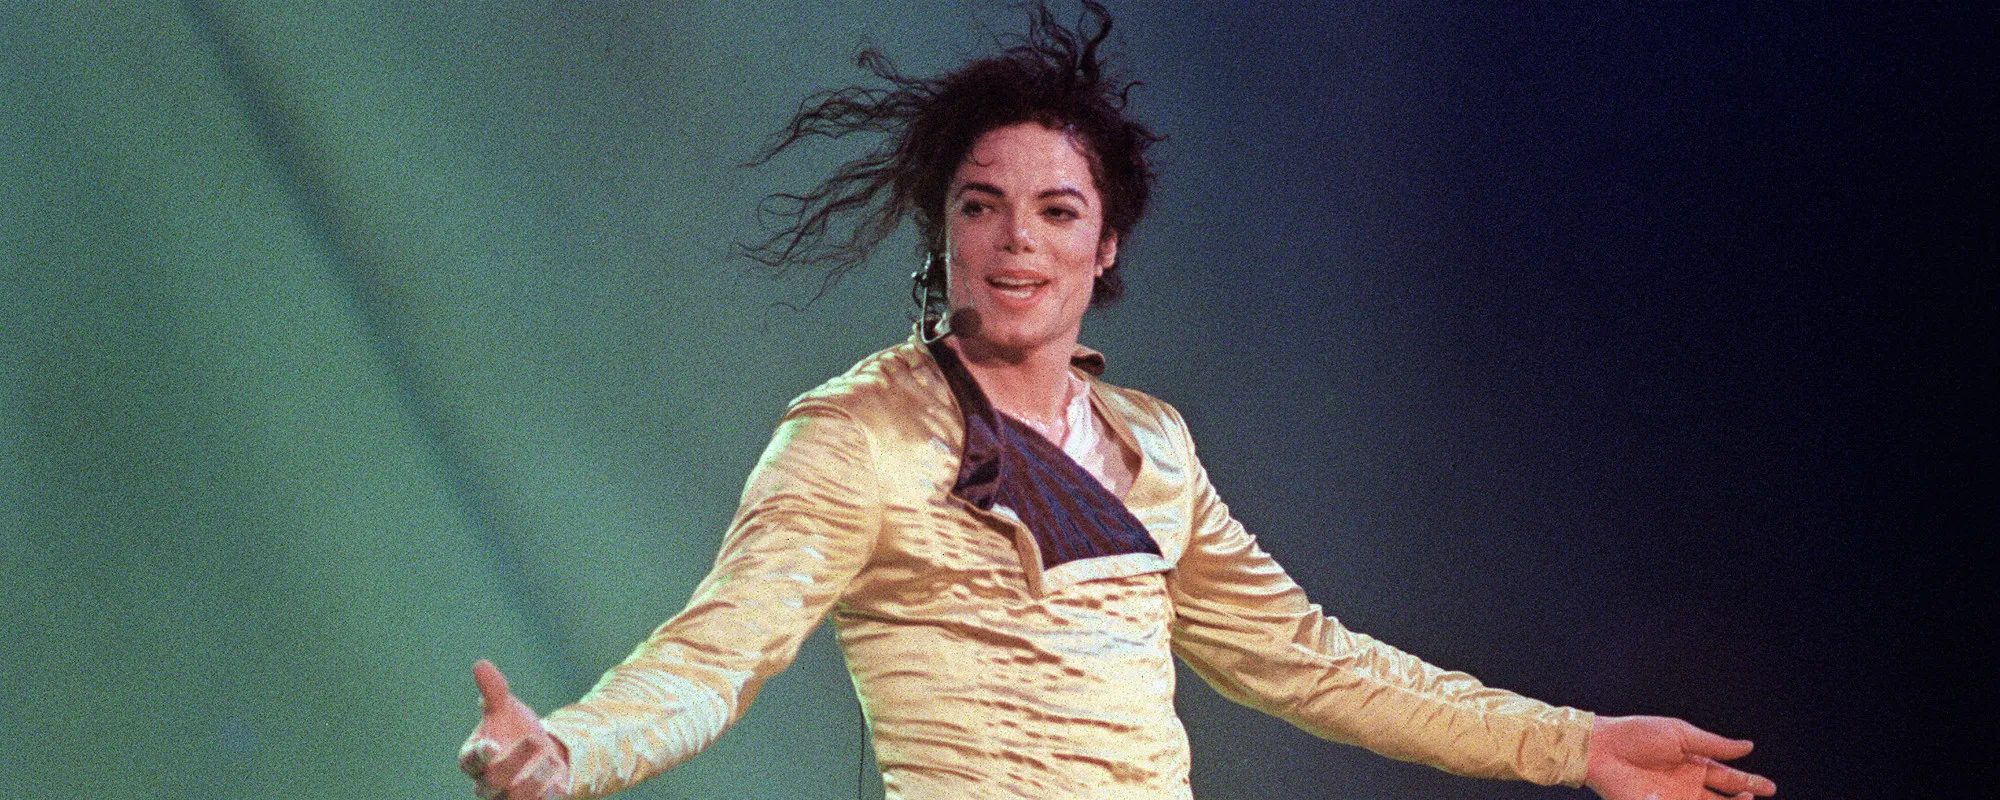 7 Songs You Didn’t Know Michael Jackson Wrote for Other Artists